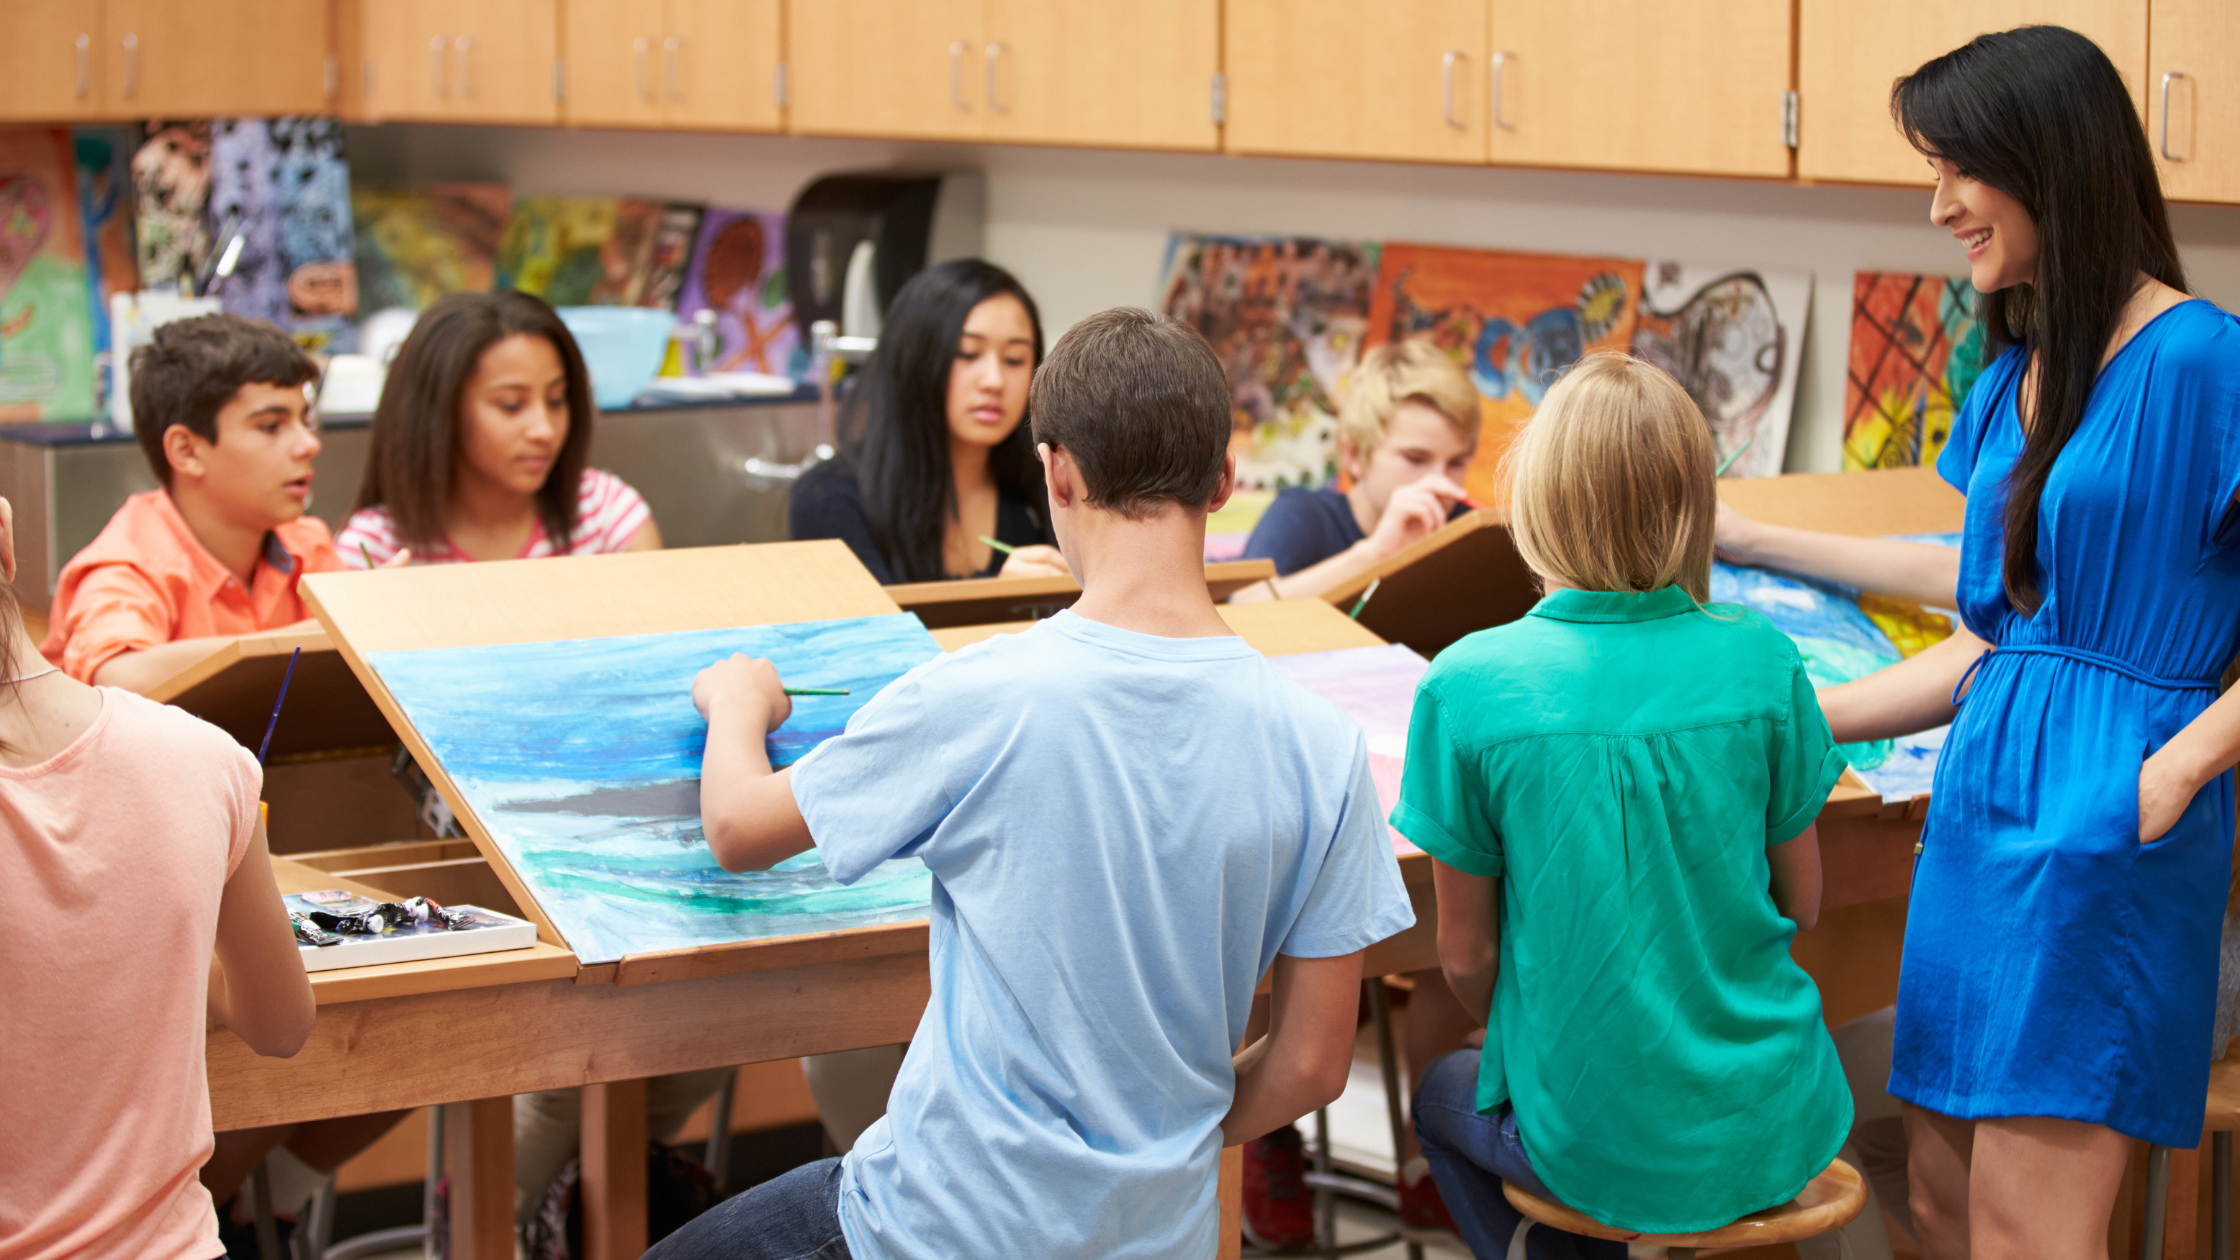 6 life skills children can learn in art classes